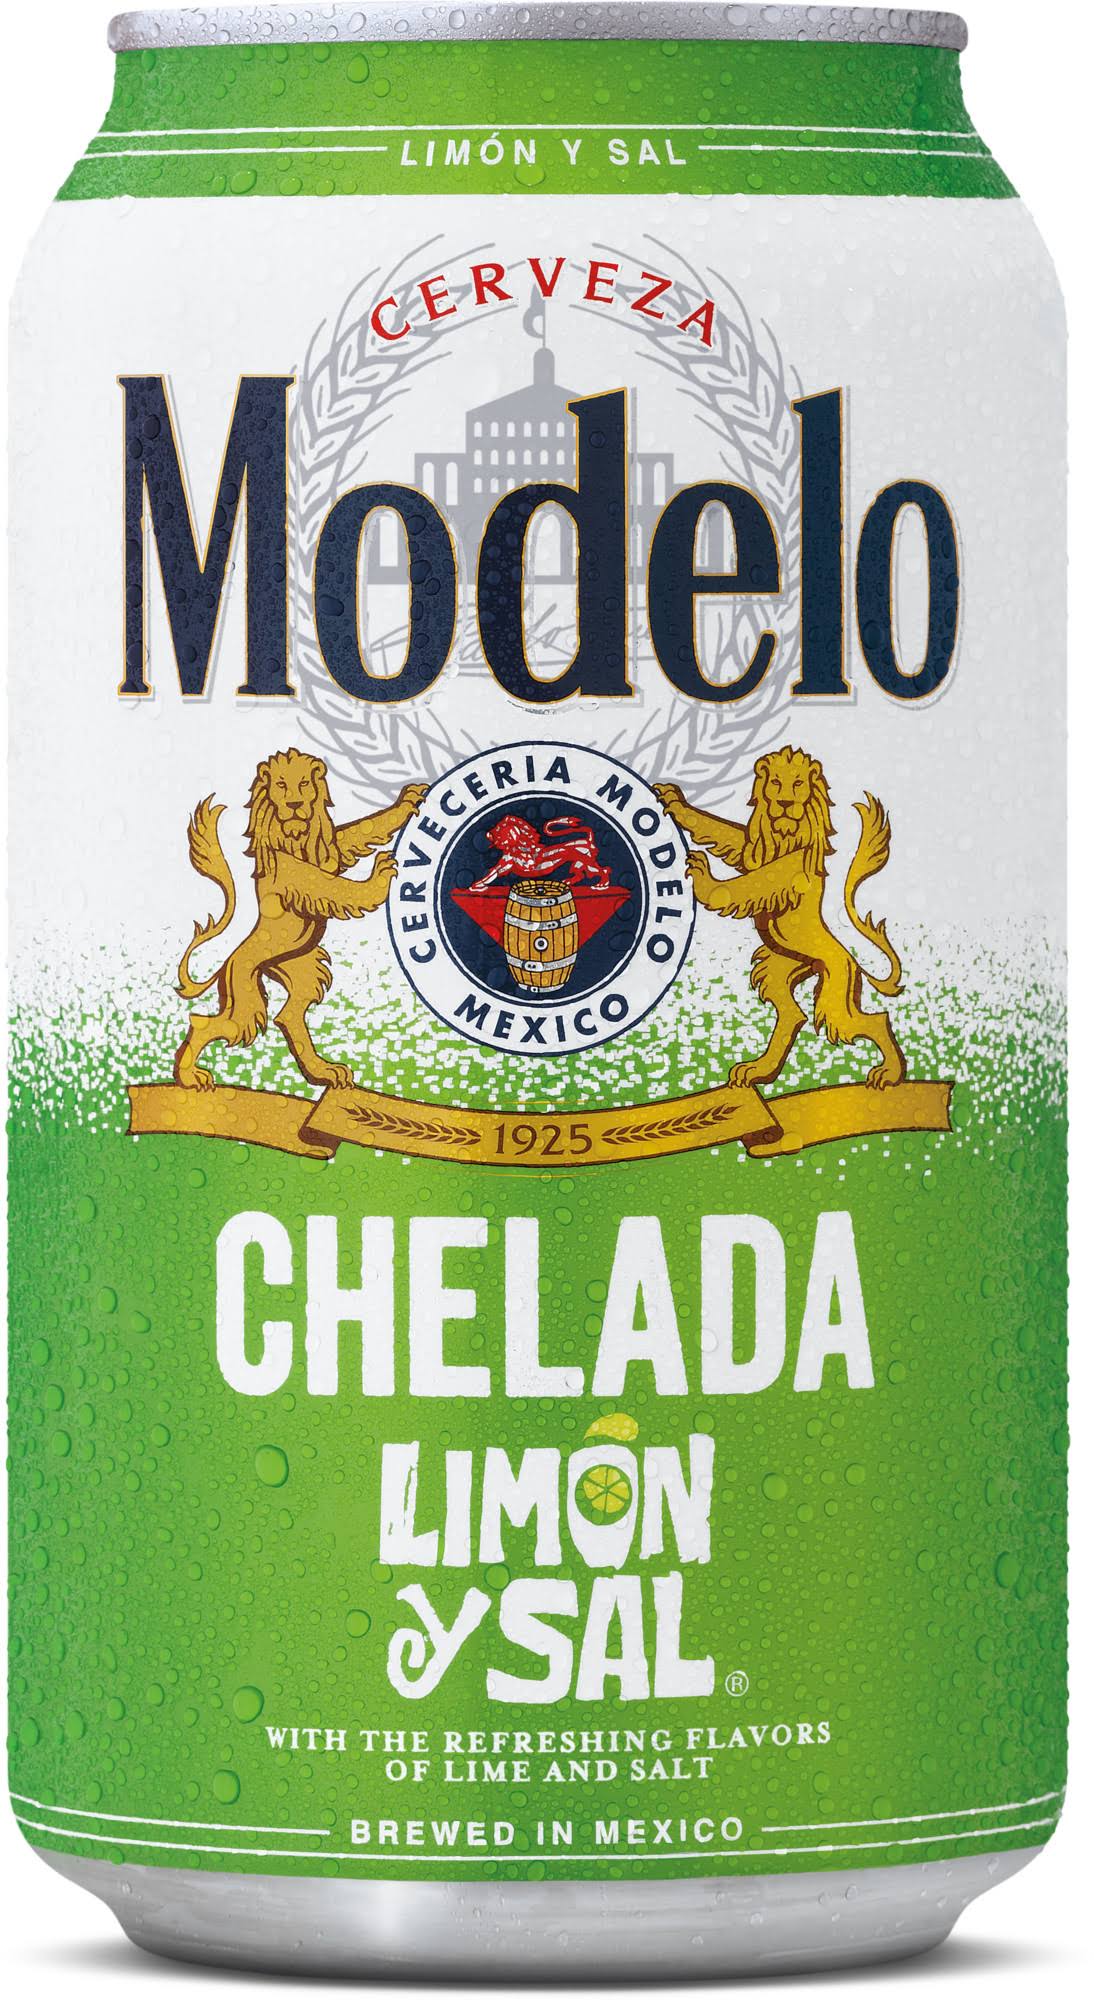 Modelo Chelada Limon Y Sal Mexican Import Flavored Beer Can - 12 fl oz